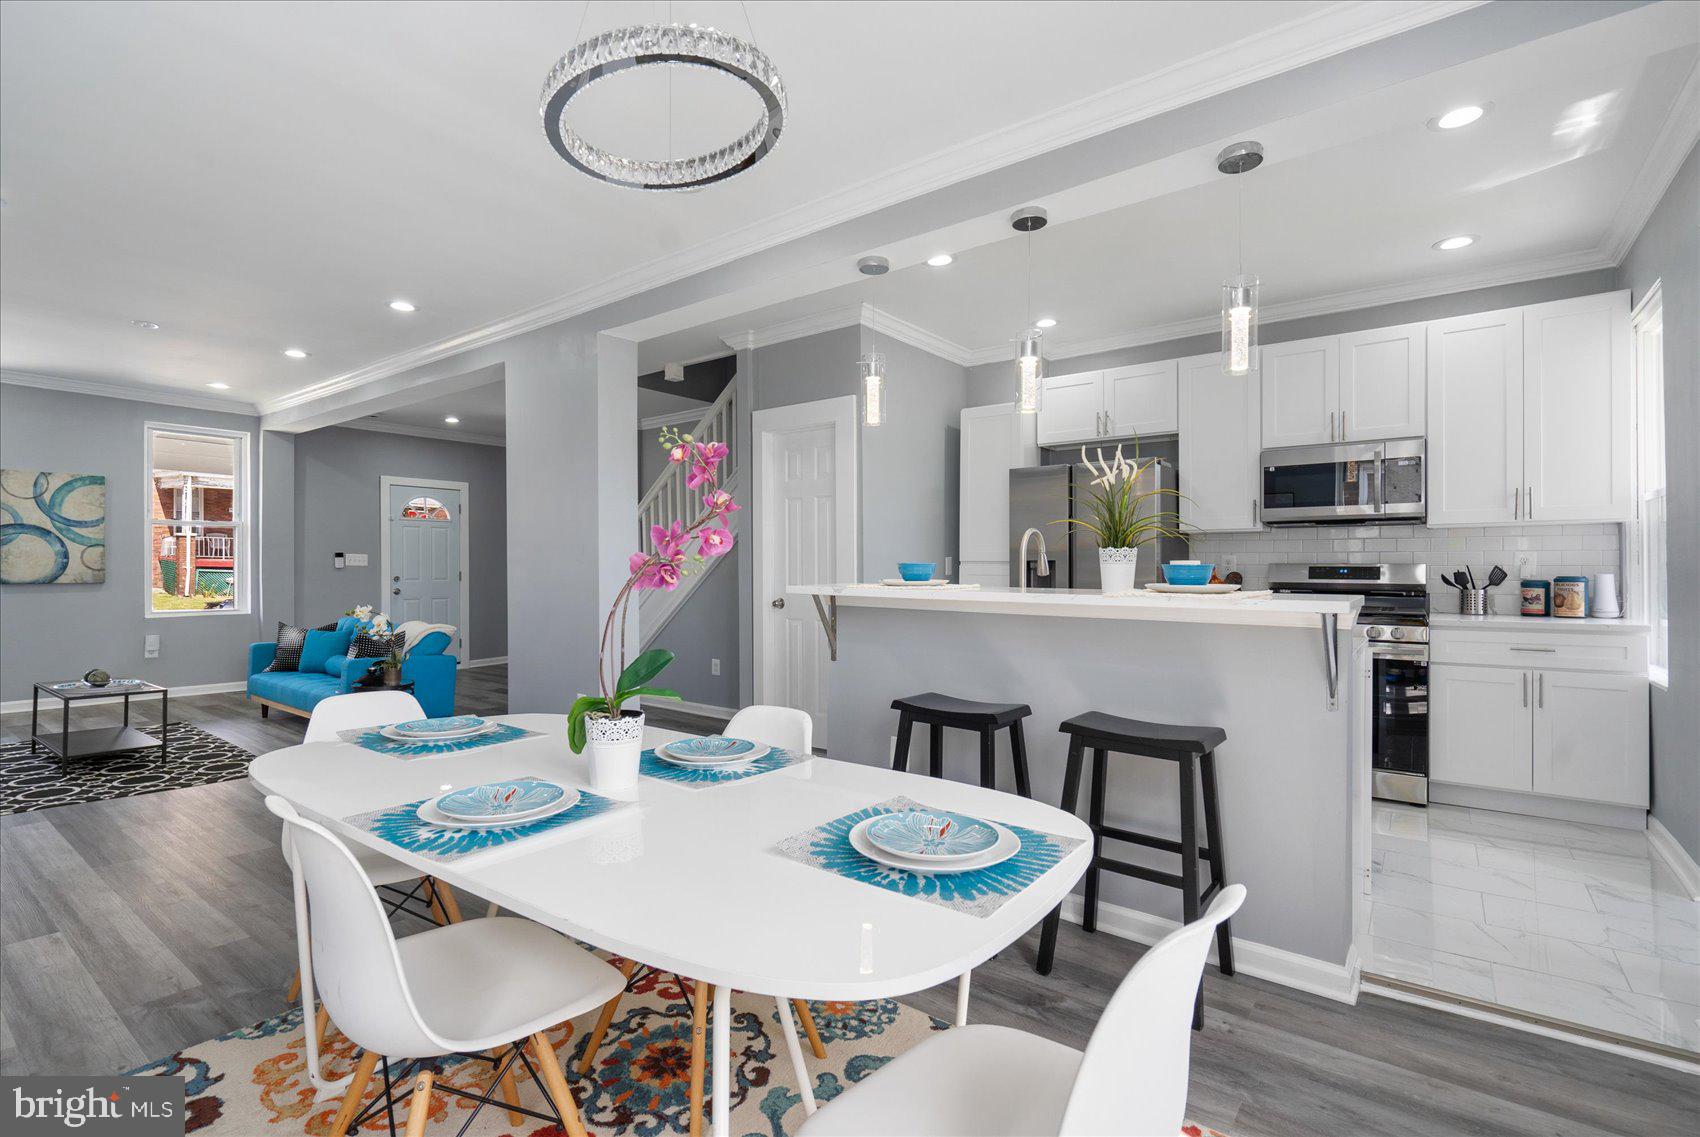 a kitchen with stainless steel appliances granite countertop a dining table chairs and view living room